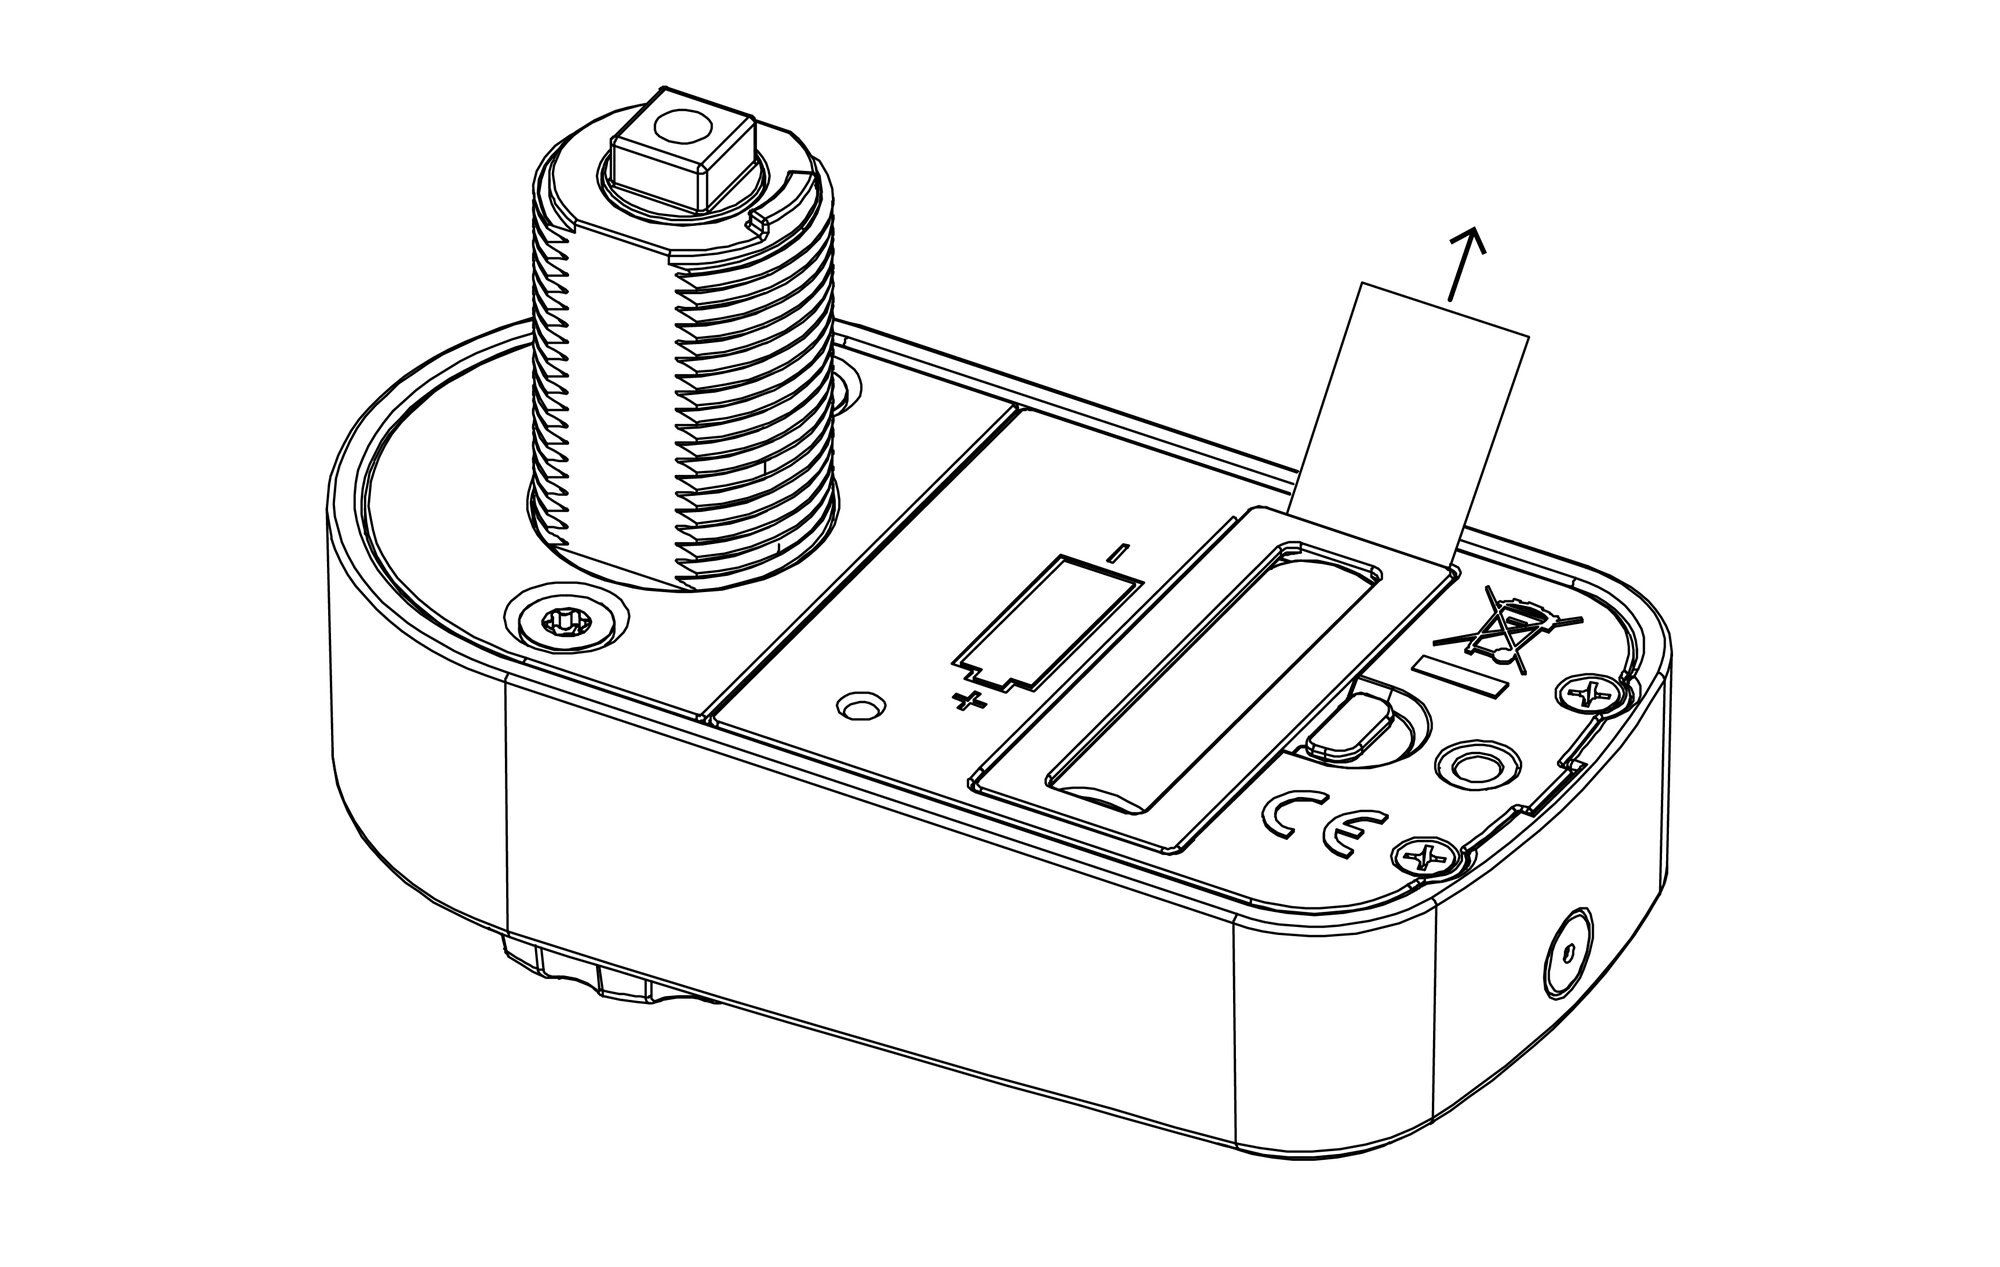 Diagram of how to pull the plastic flap away from the battery on Flexlock Visible